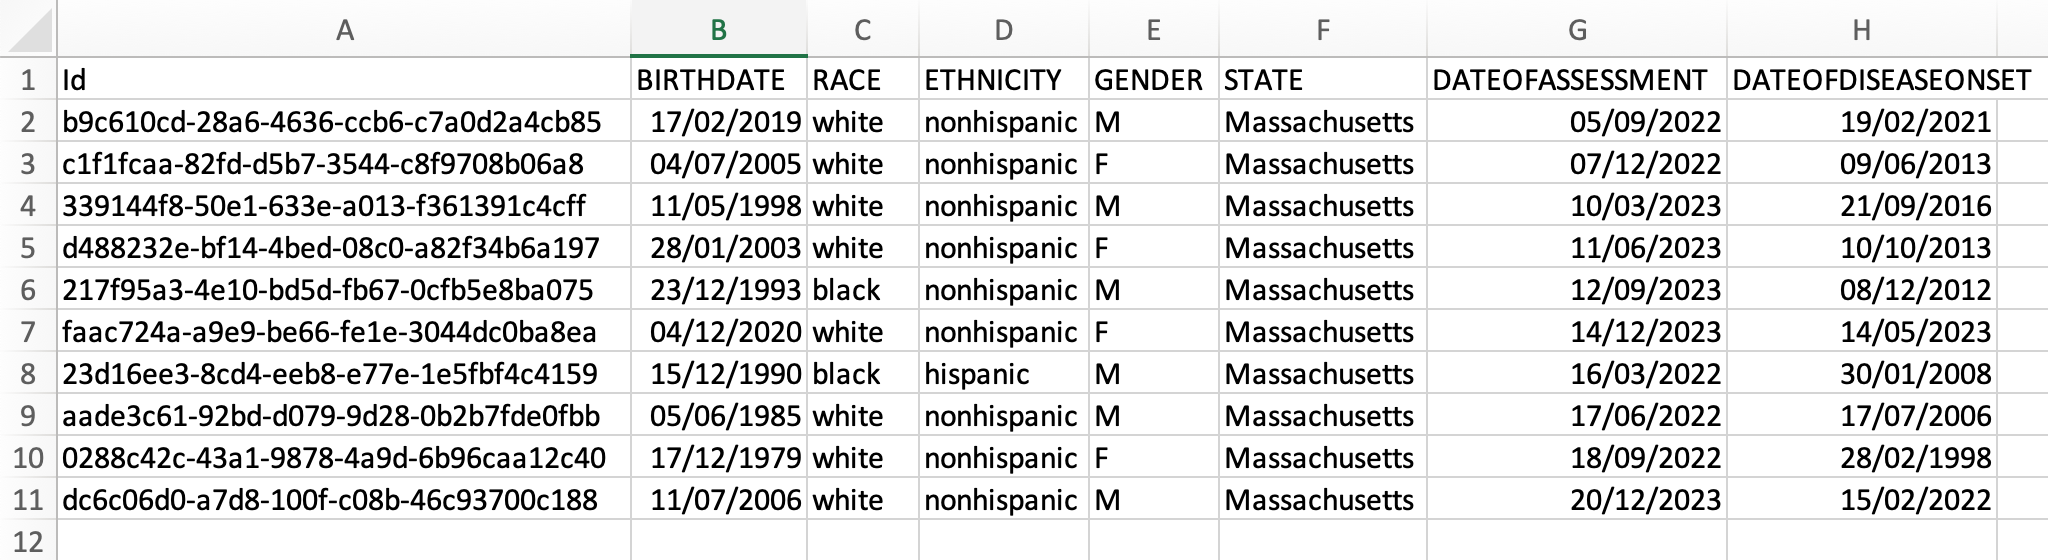 Image of spreadsheet with columns ID, Birth Date, Race, Ethnicity, Gender, State, Date of Assessment and Date of Disease Onset as the columns, with 10 lines of data filled in below for each of these columns. 